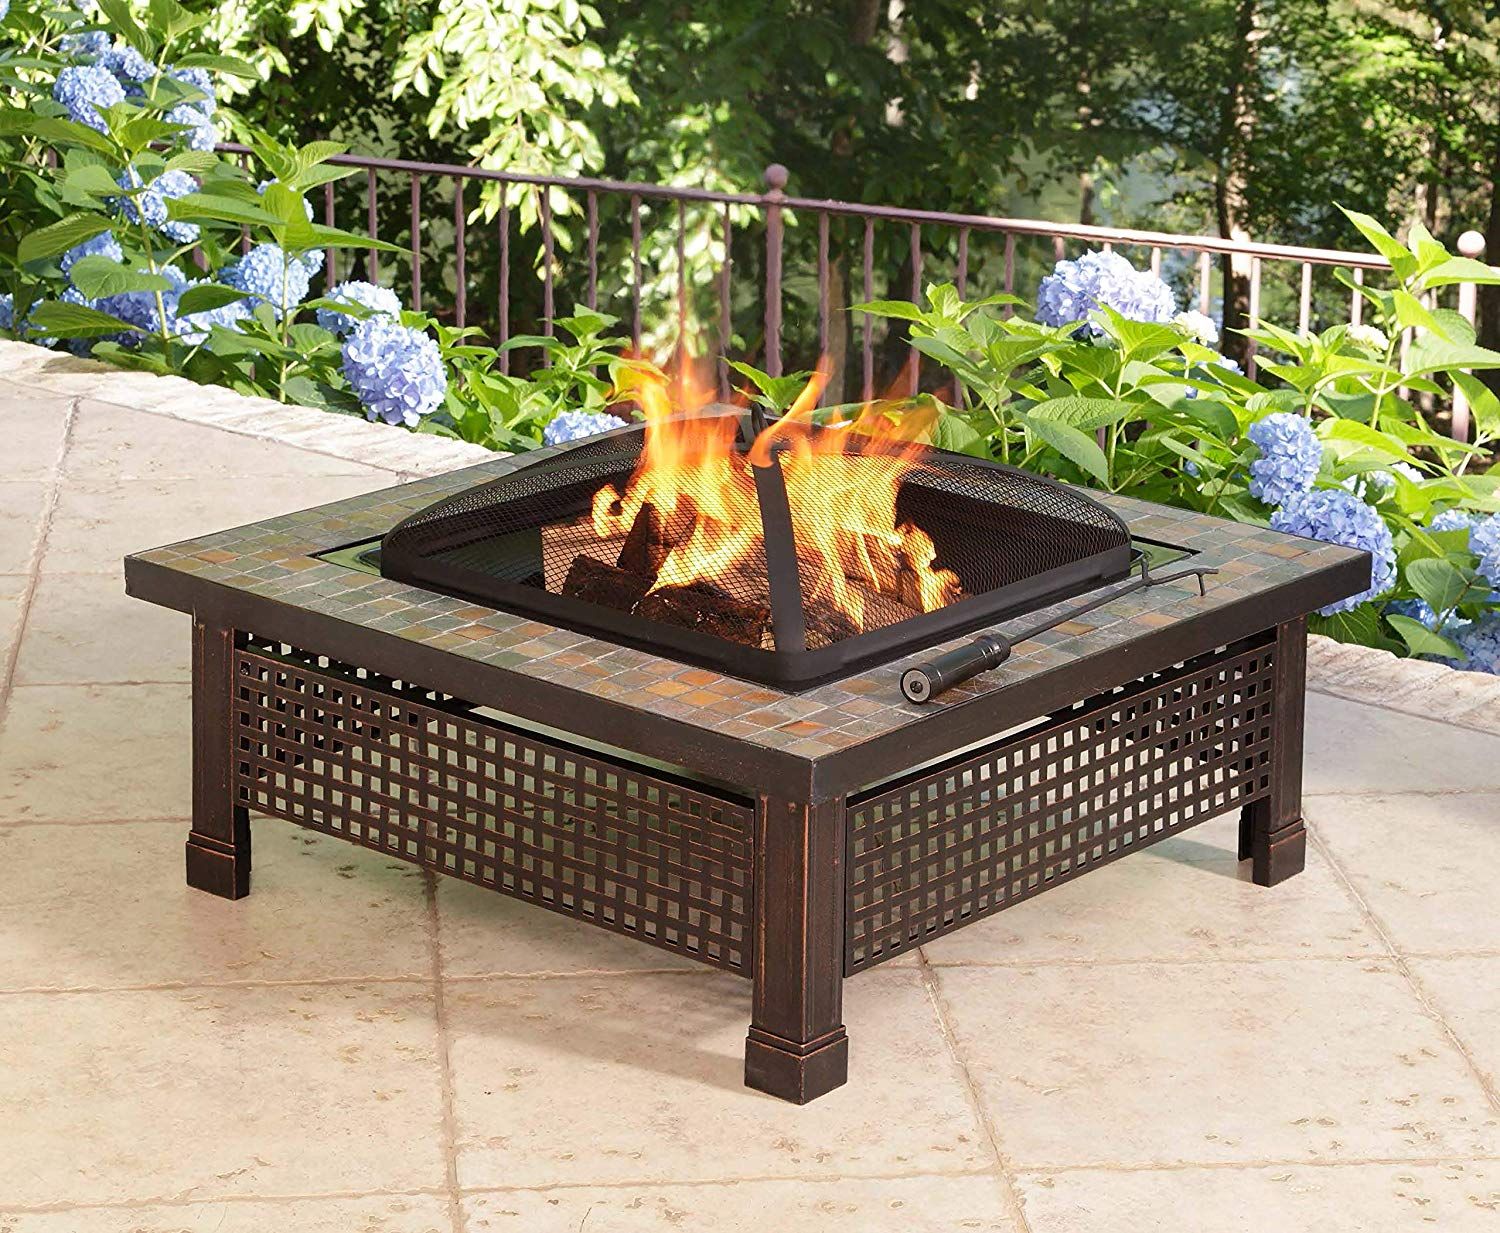 Free Pictures Of Brick Fire Pits